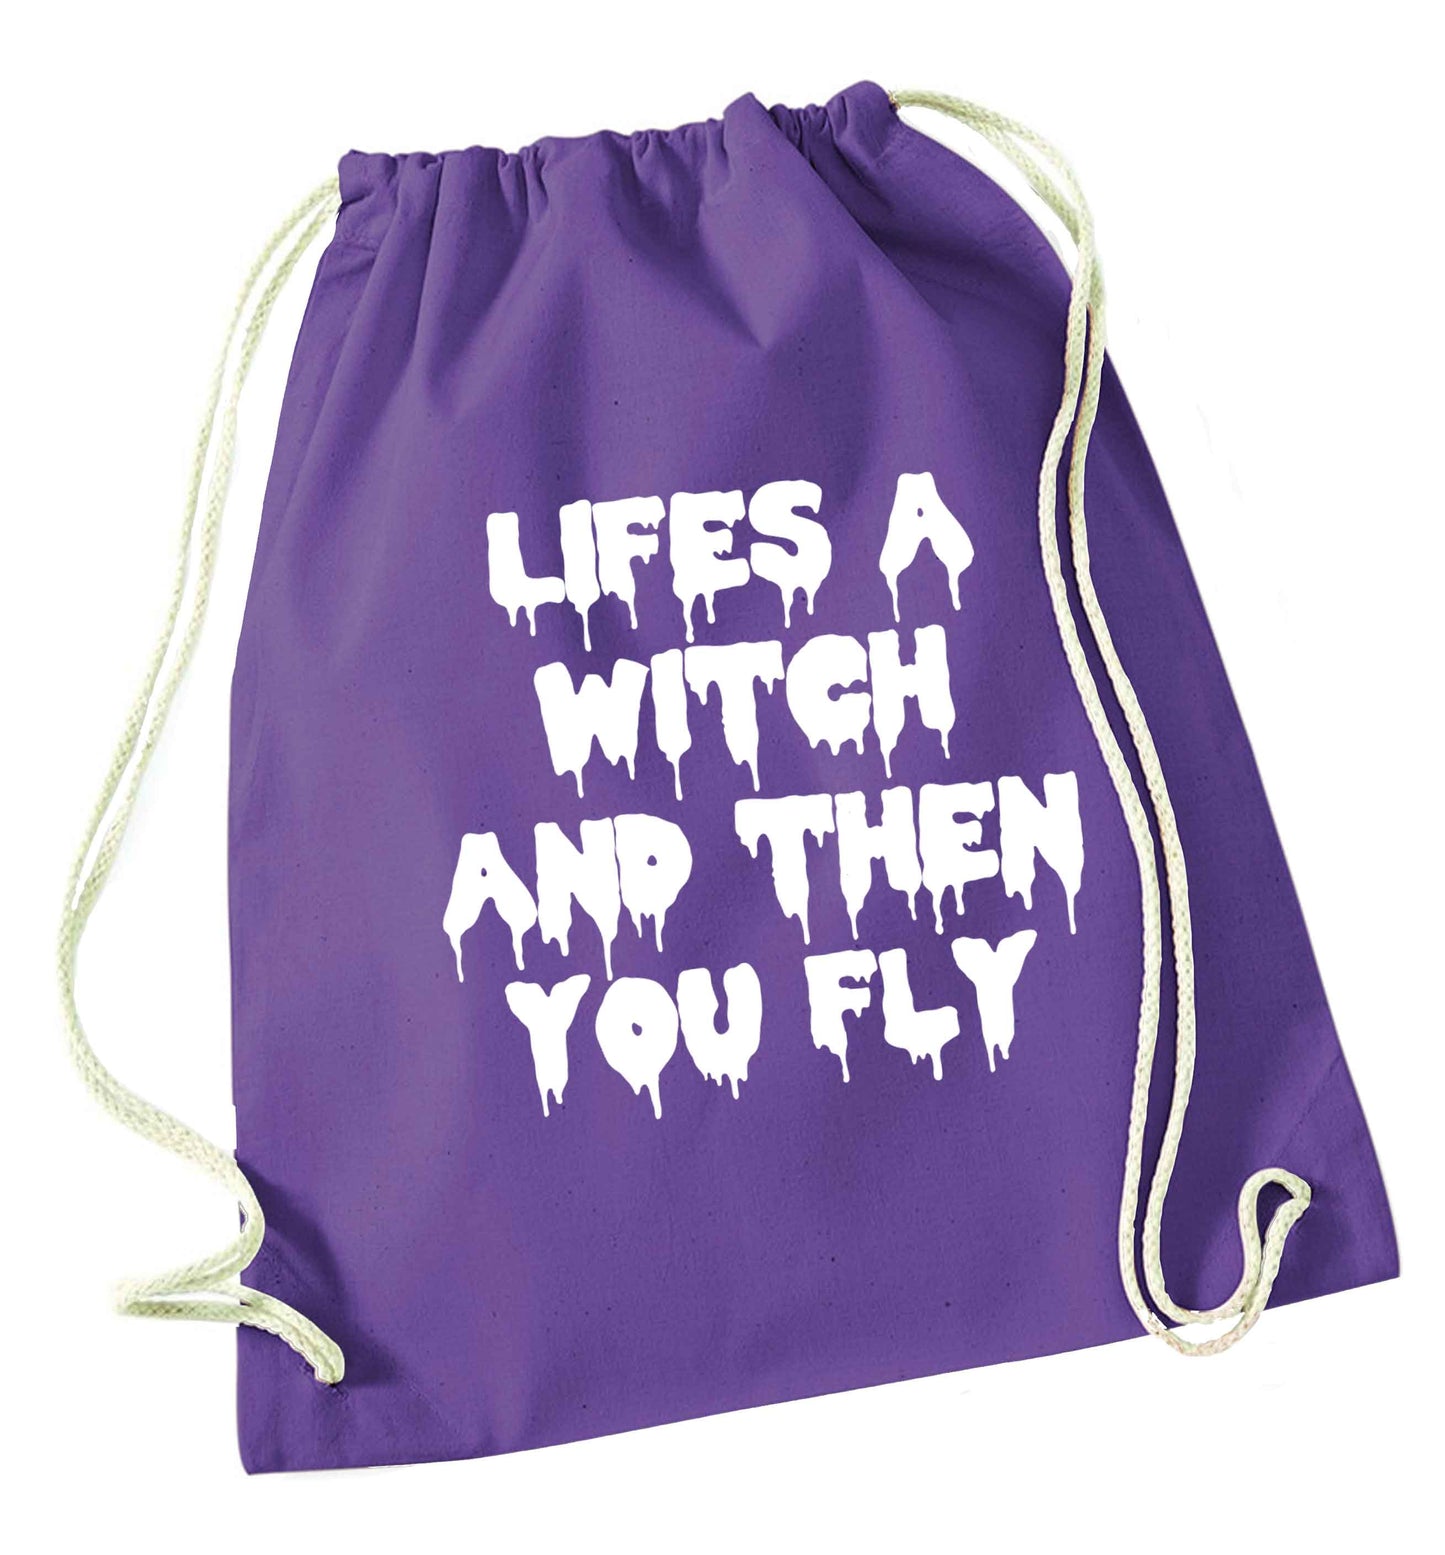 Life's a witch and then you fly purple drawstring bag